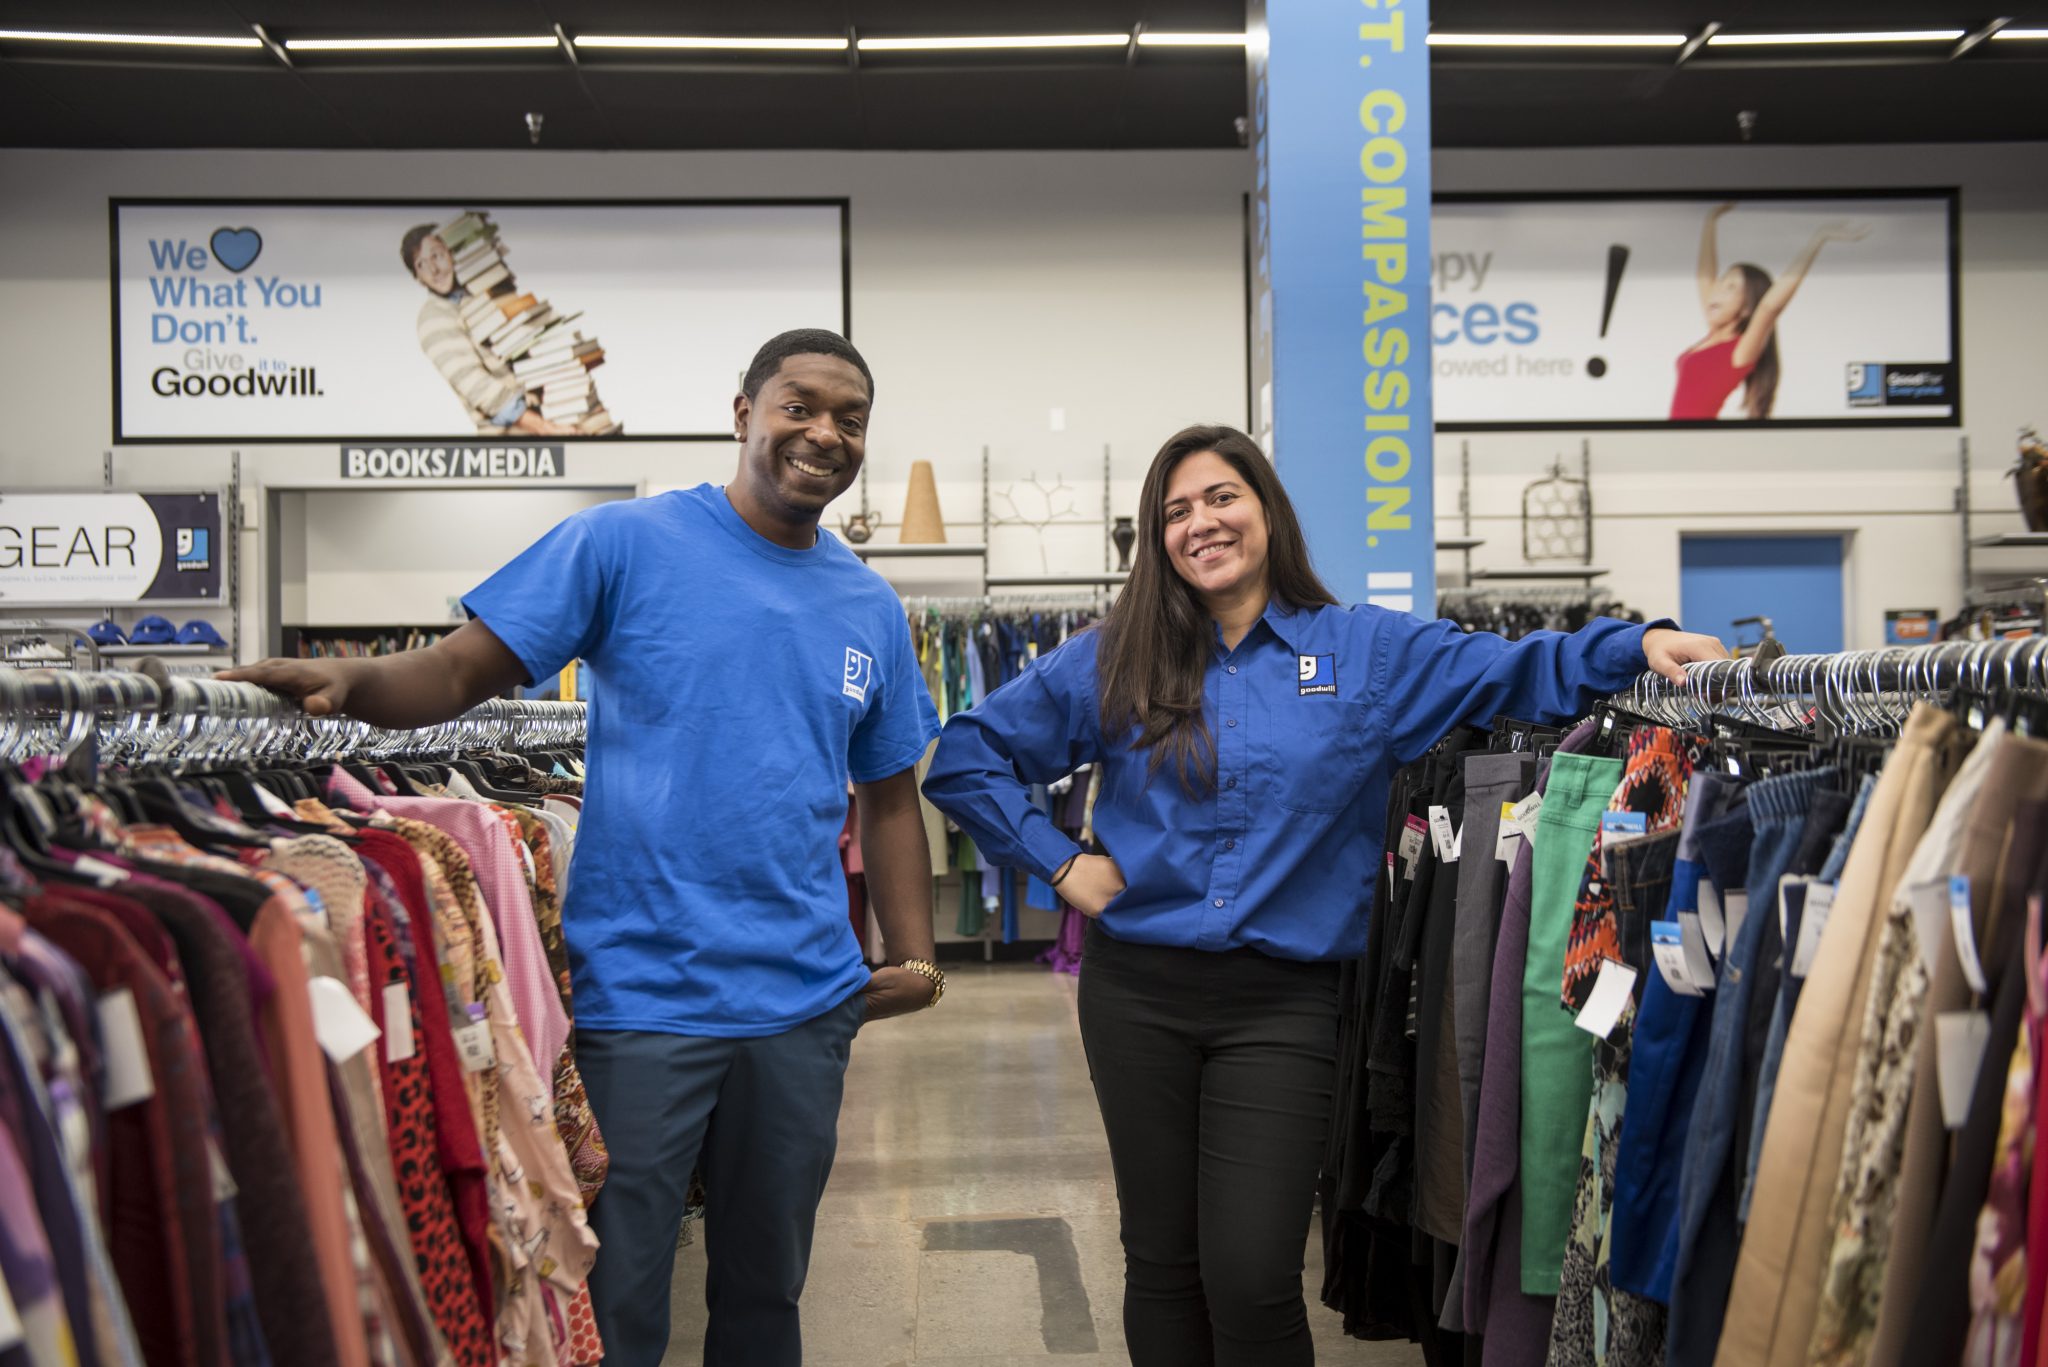 Goodwill Industries of Northern Illinois Employees